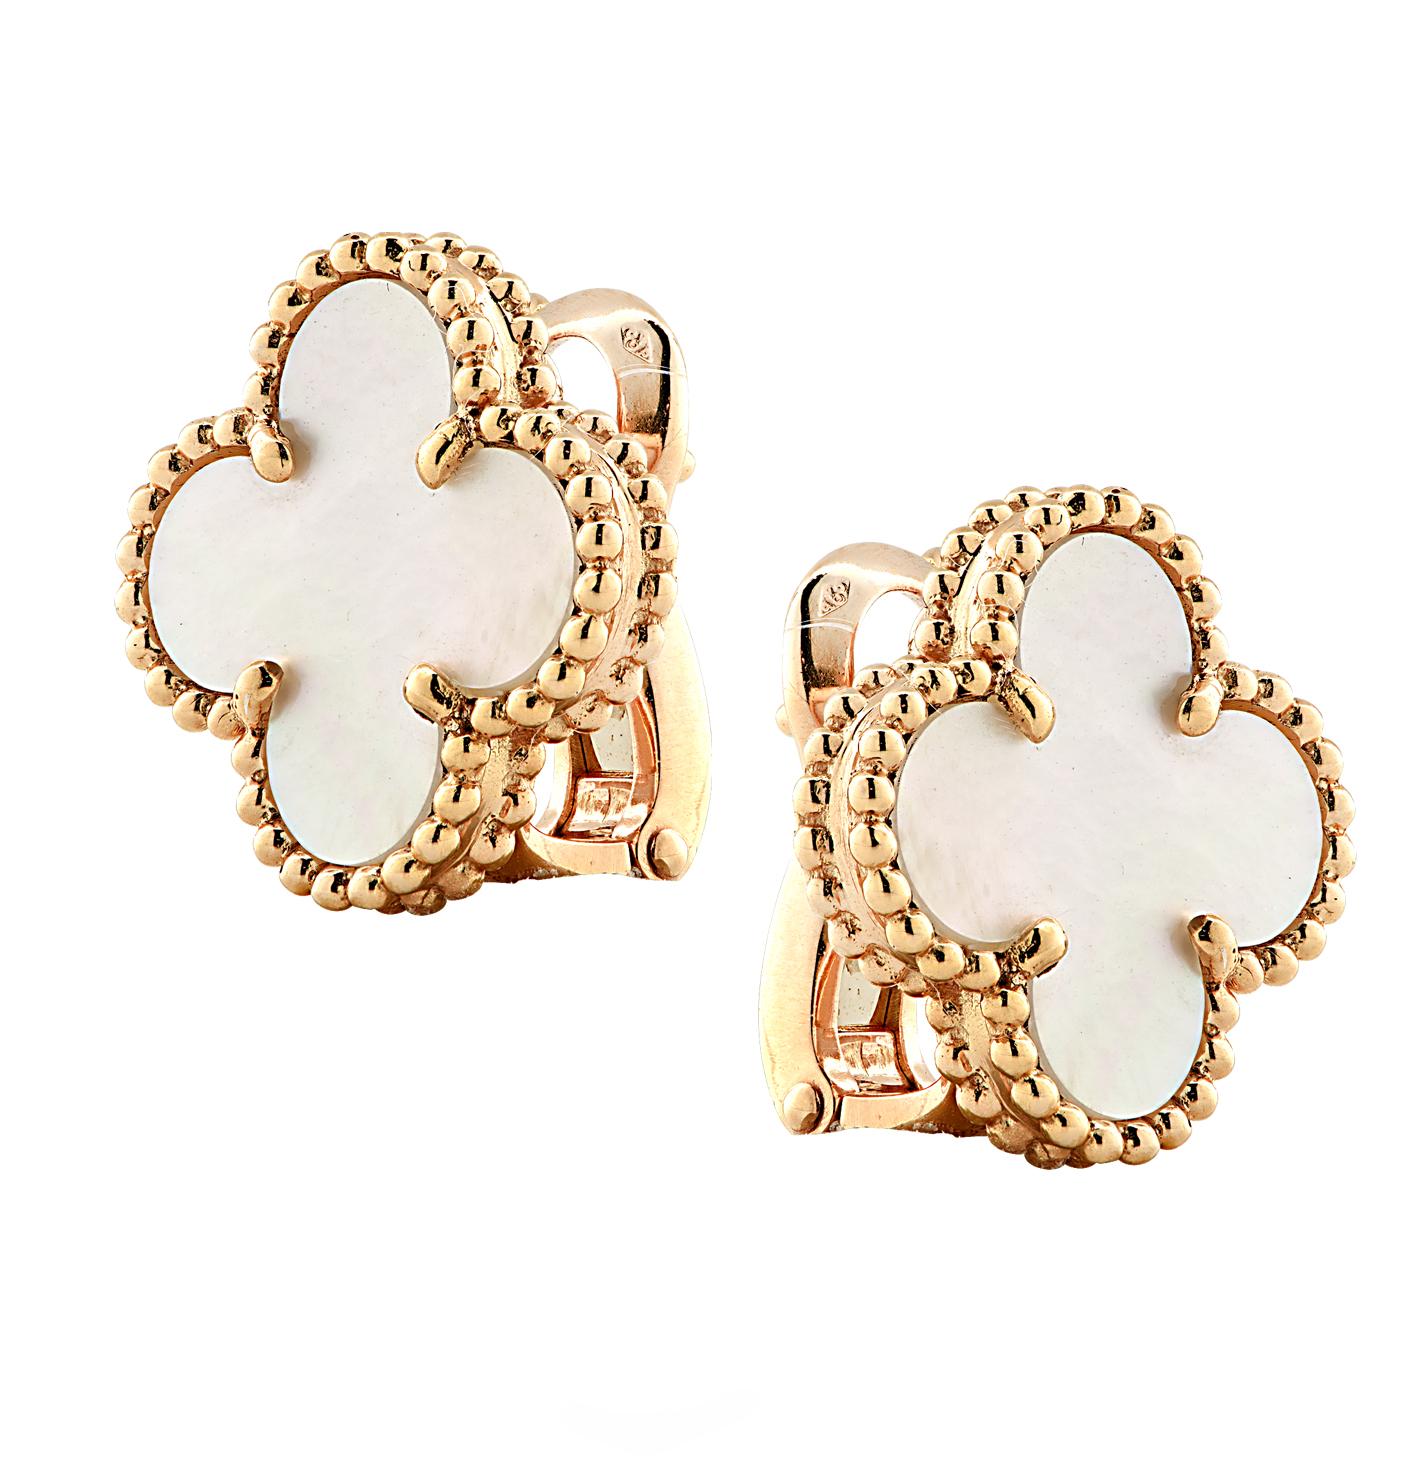 From the House of Van Cleef & Arpels, these exquisite Vintage Alhambra earrings, finely handmade in 18 Karat yellow Gold, feature a symmetrical design inspired by the clover leaf. The clovers are embellished in mother of pearl and are framed in gold